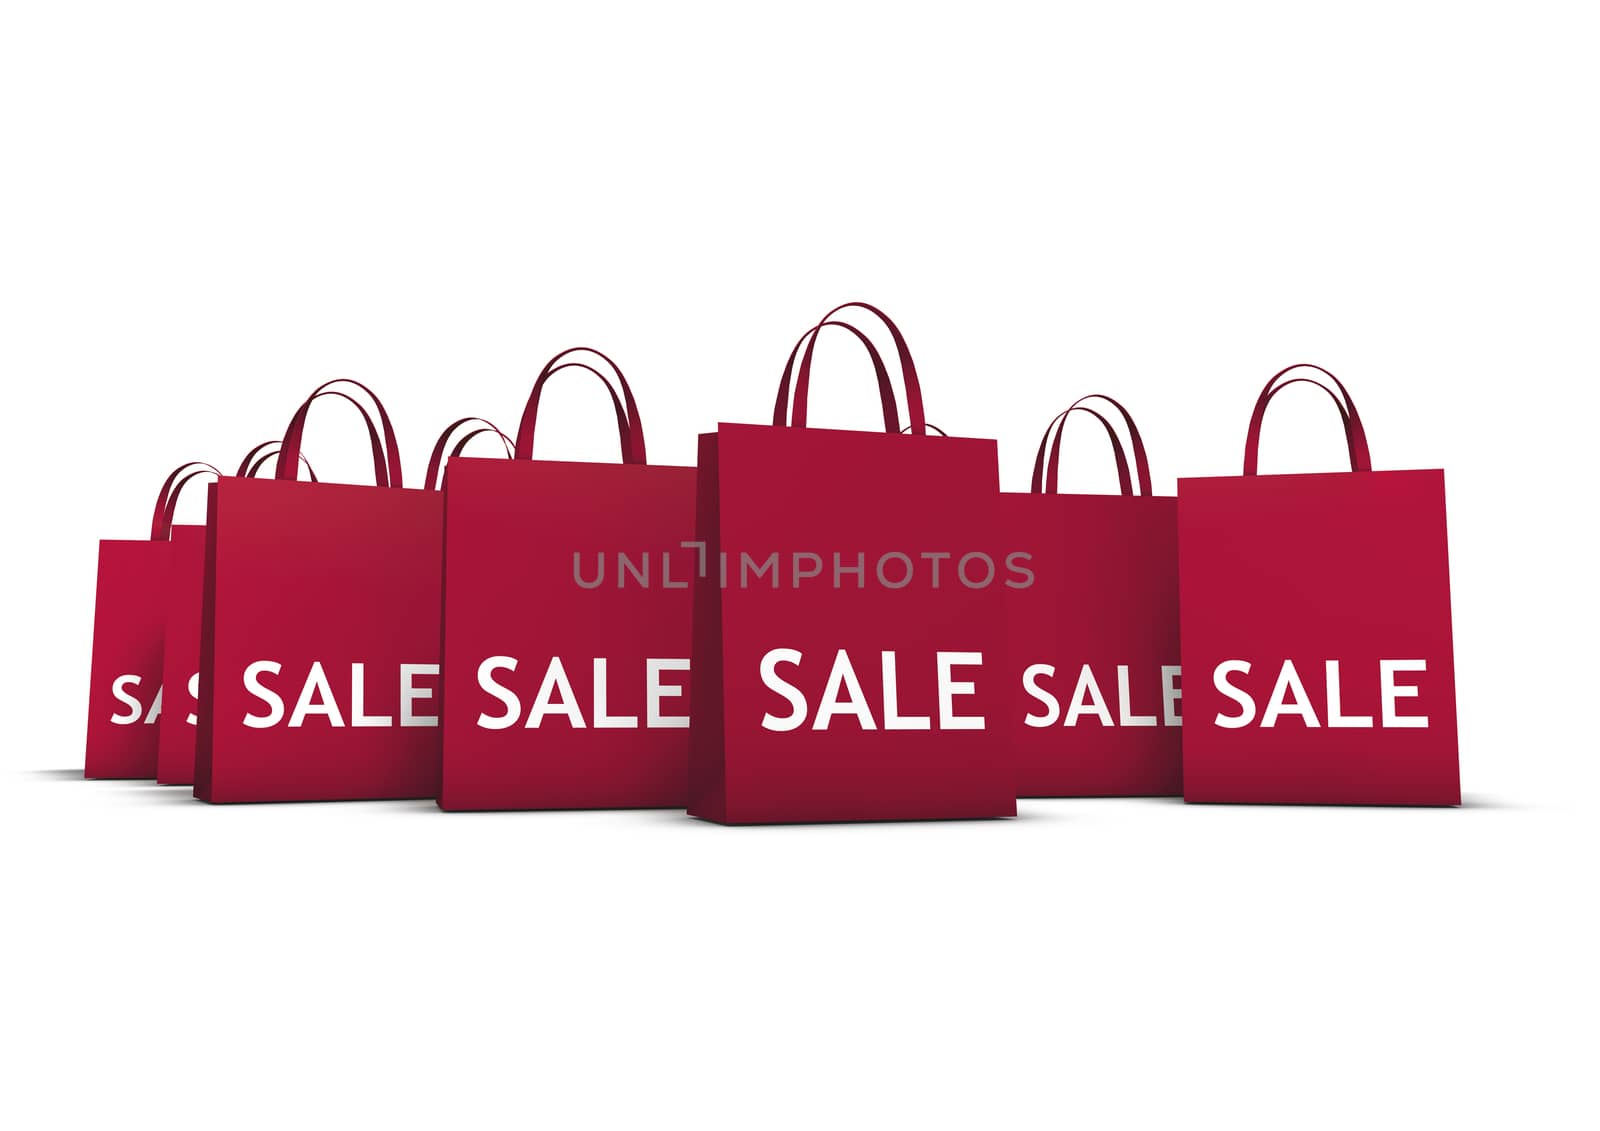 Discount, sale and shops offers concept with a lot of red shopping bags with sale sign on white background.